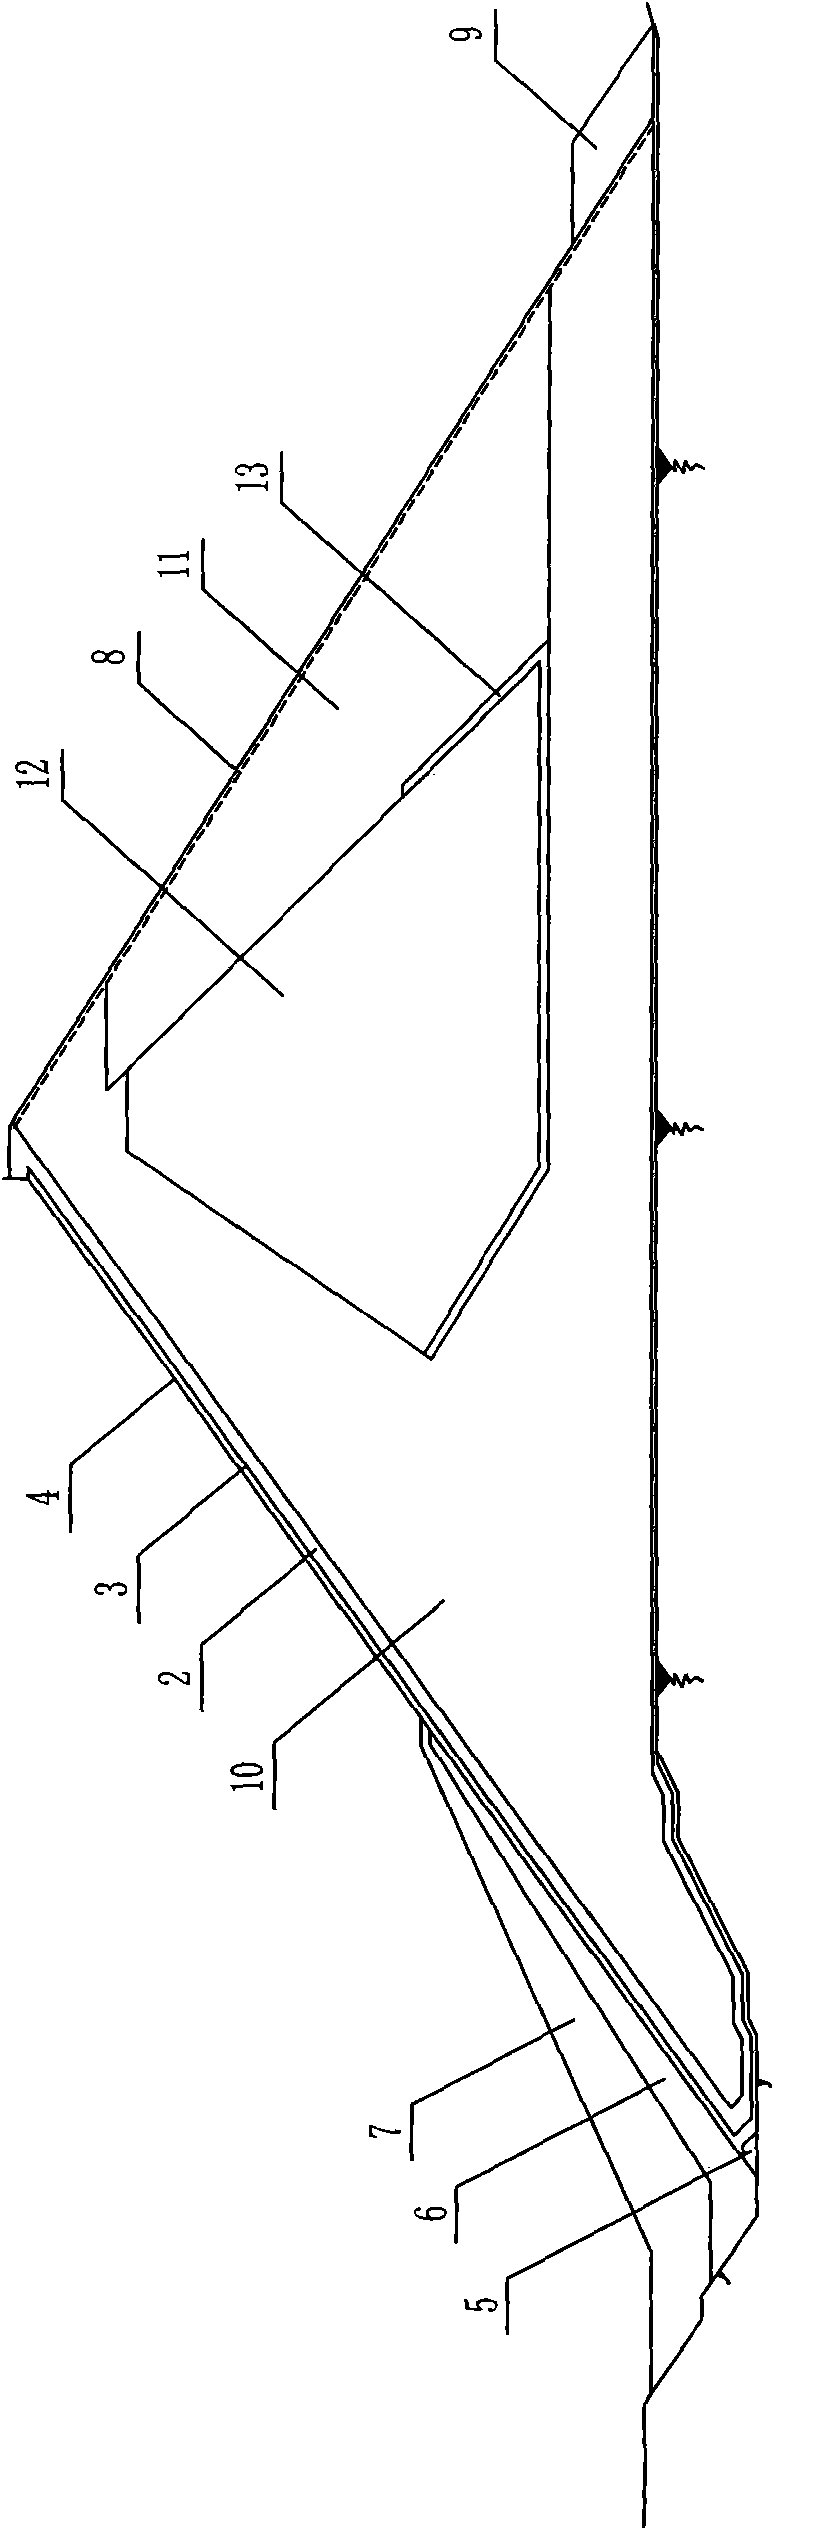 Face plate rock-fill dam structure of reasonably utilizing sand gravel material and construction method thereof